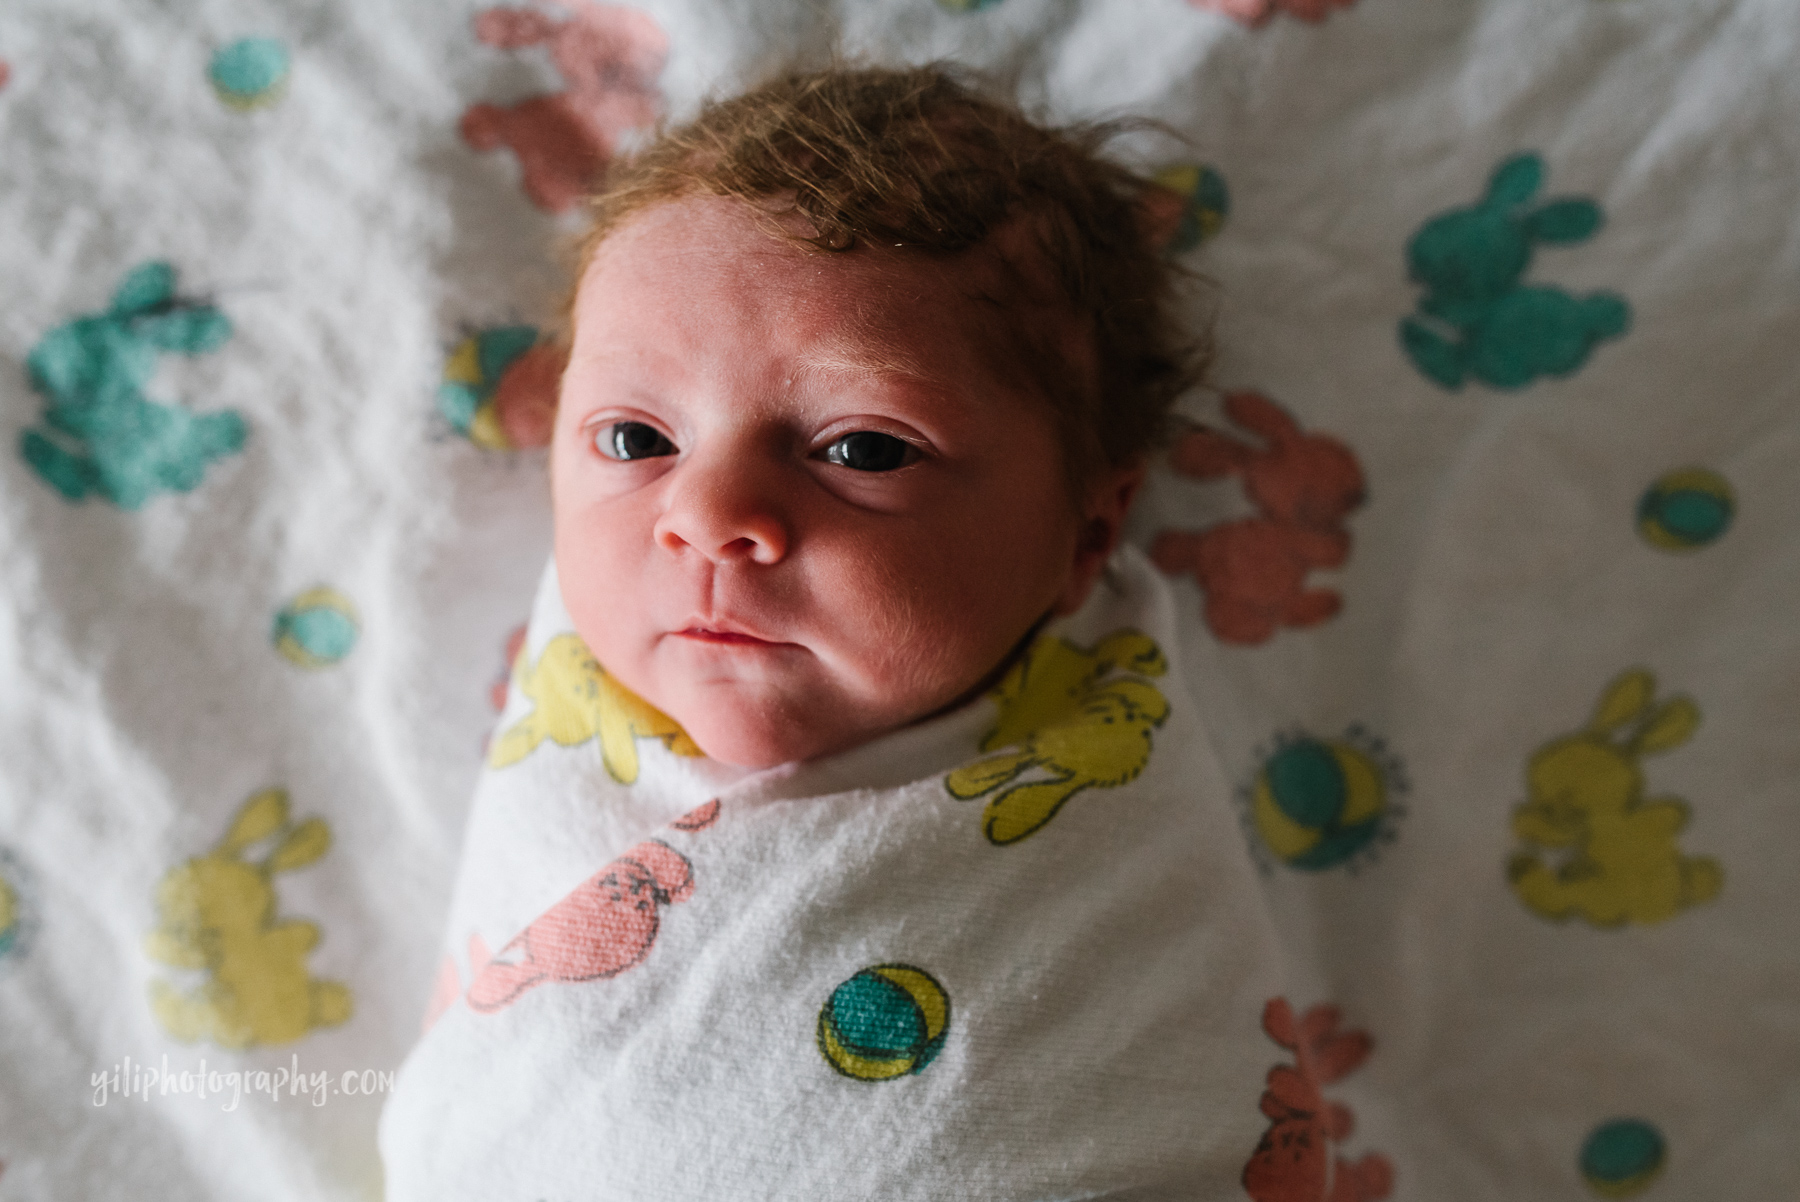 newborn baby girl with red hair swaddled in hospital blankets